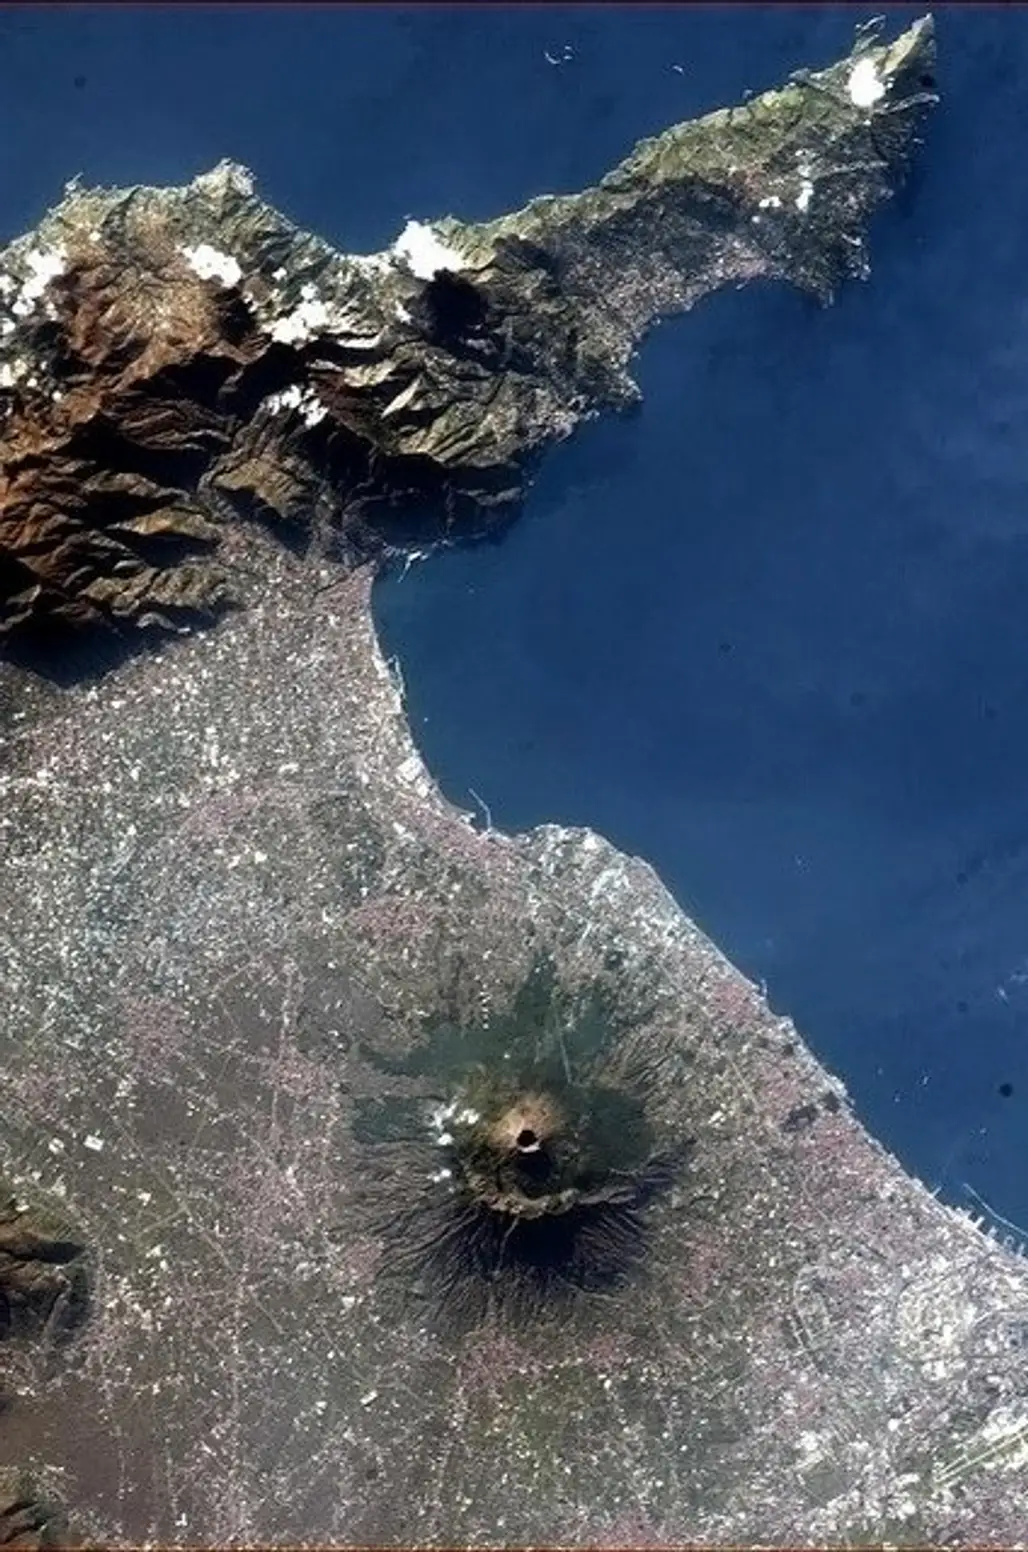 Mt. Vesuvius and the Bay of Naples, Italy